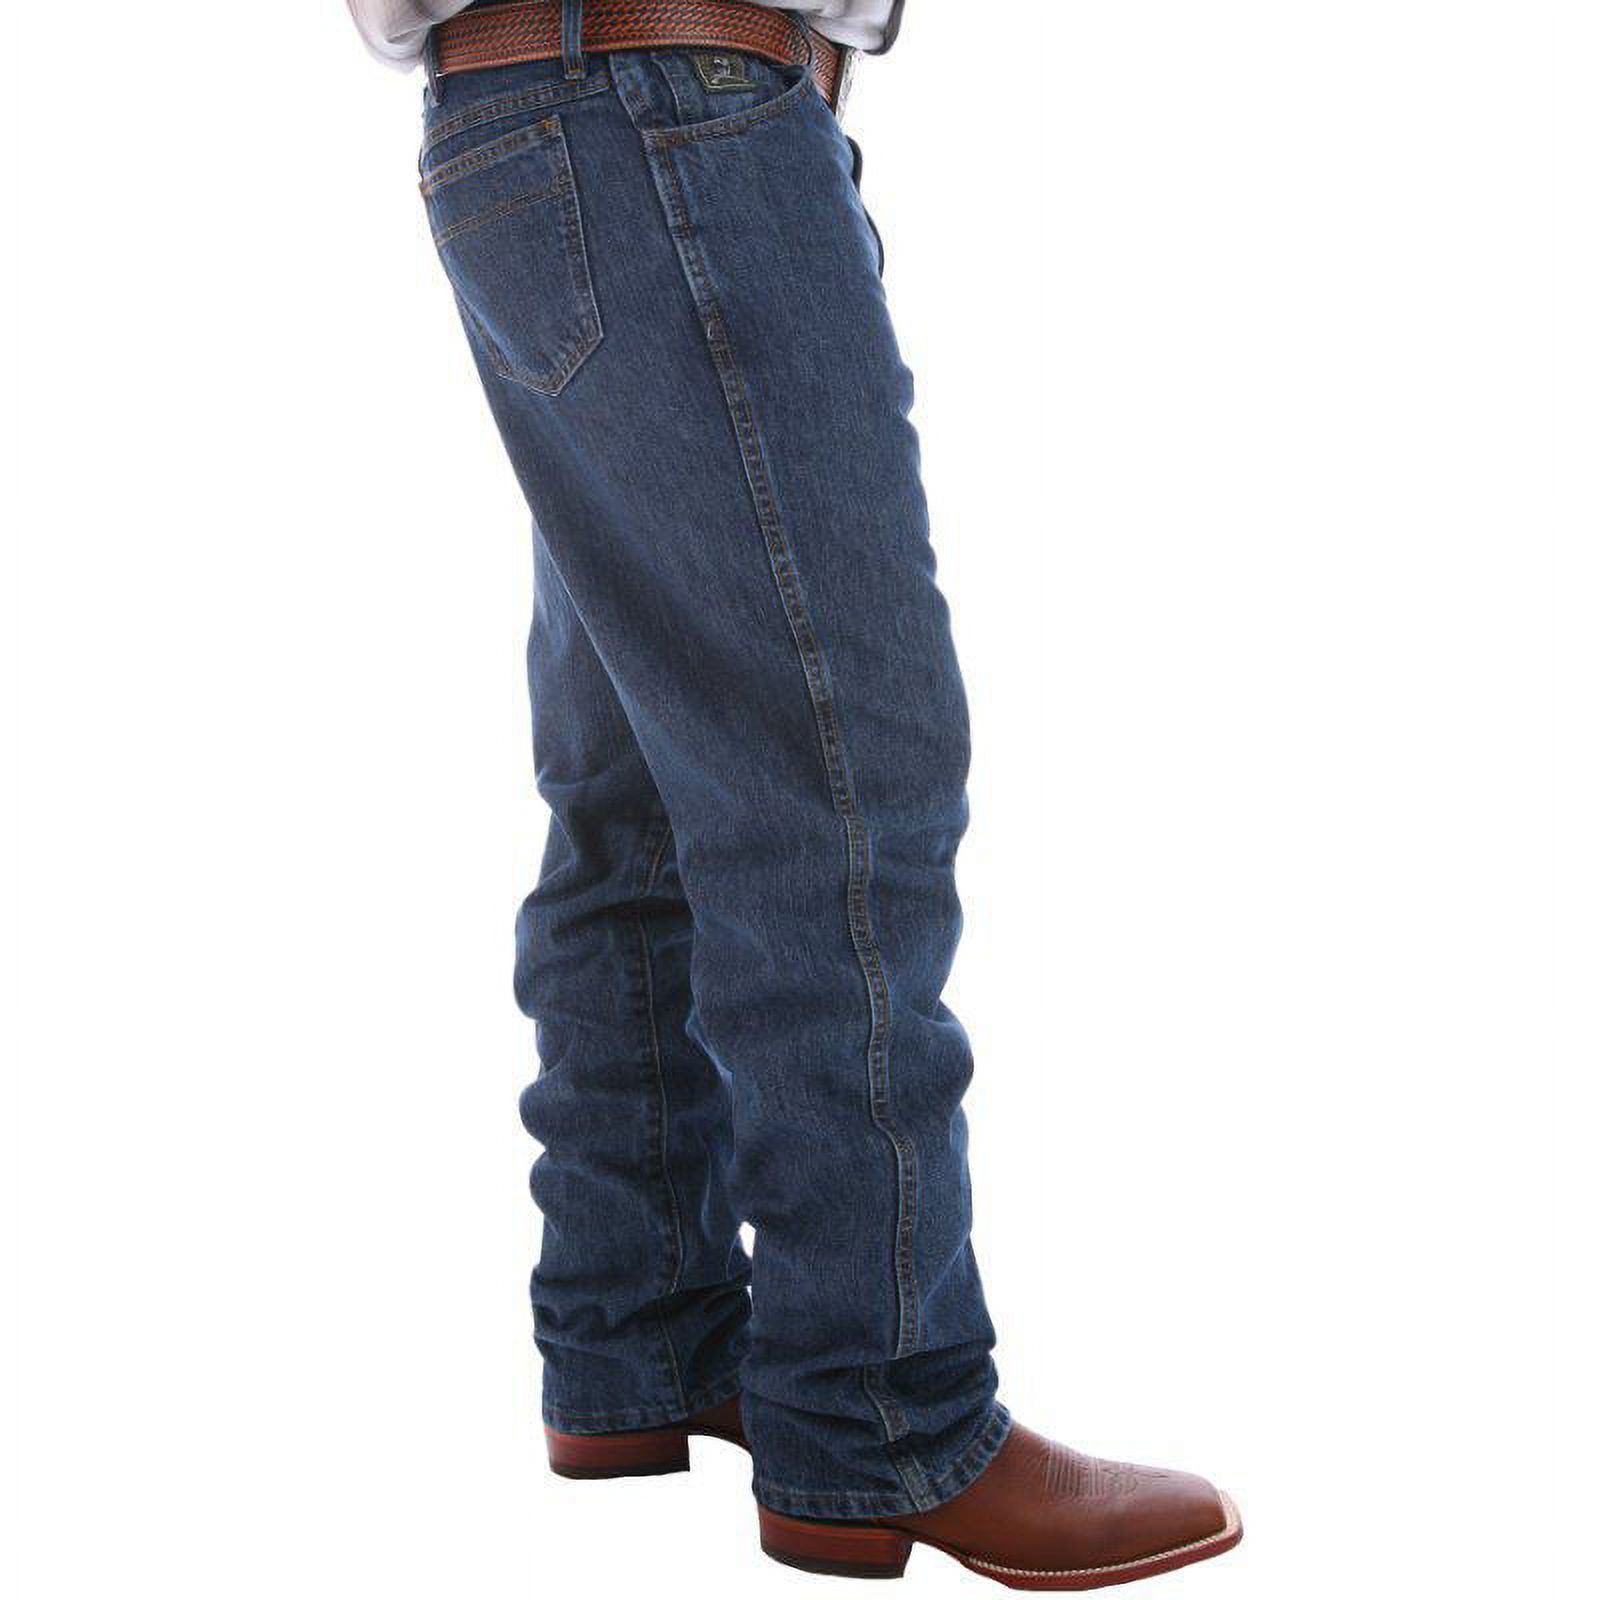 Cinch Men's Green Label Relaxed Fit Dark Stonewash Jeans Dark Stone 29W x 30L  US - image 4 of 4